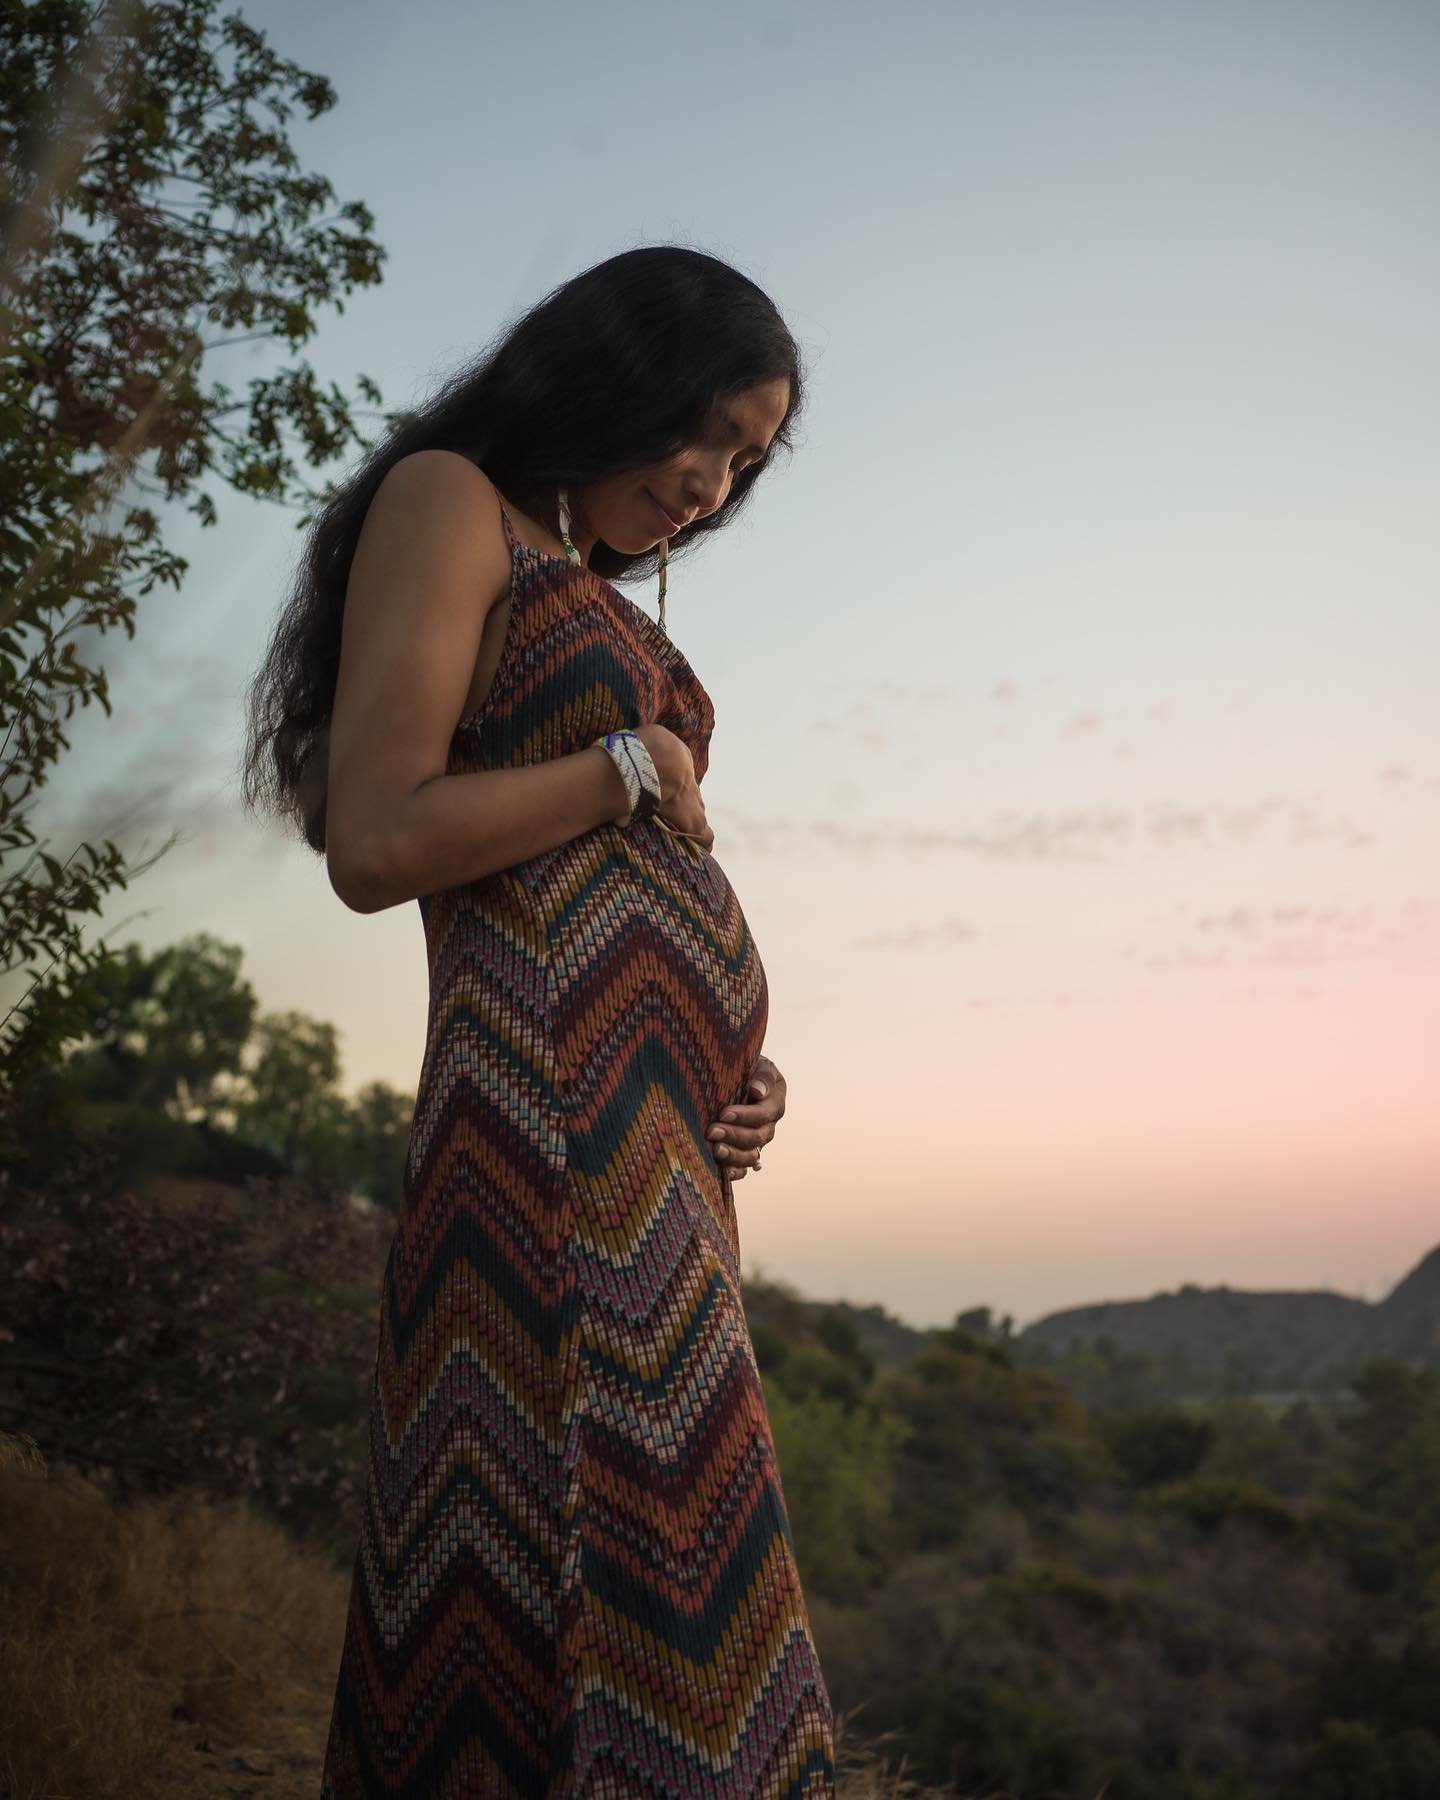 Honored and grateful to bring life into this world with such an incredible woman.  So inspired by the waves of change our next generations bring.  It&rsquo;s coming.  For the first time in a while, I have hope. ❤️

📷: Tongva Lands